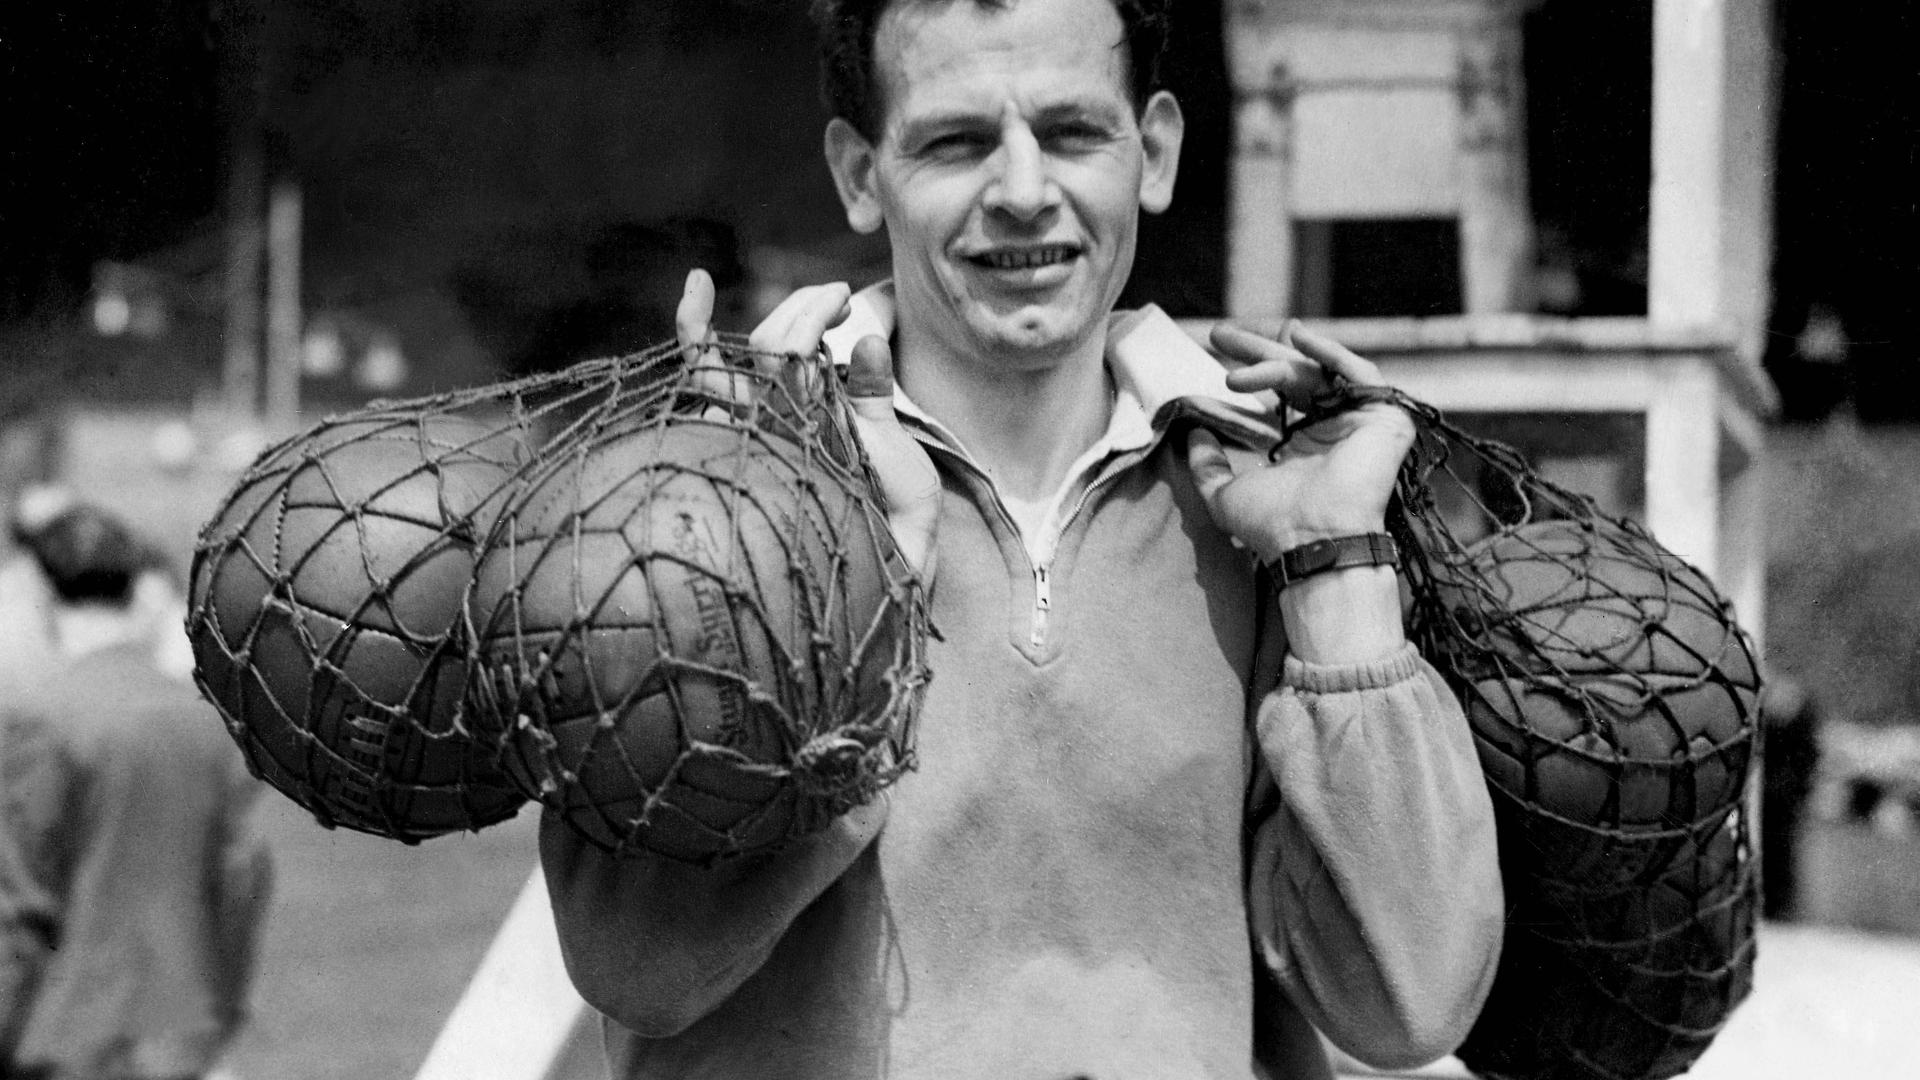 Bildnummer: 60006938  Datum: 09.05.1950  Copyright: imago/United Archives International
Walter Winterbottom, the England team manager and coach with a selection of balls. 9th May 1950 kbdig 1950 quer Portrait  PUBLICATIONxINxGERxSUIxAUTxONLY 

 60006938 Date 09 05 1950 Copyright Imago United Archives International Walter Winterbottom The England Team Manager and Coach With a Selection of Balls 9th May 1950 Kbdig 1950 horizontal Portrait PUBLICATIONxINxGERxSUIxAUTxONLY  